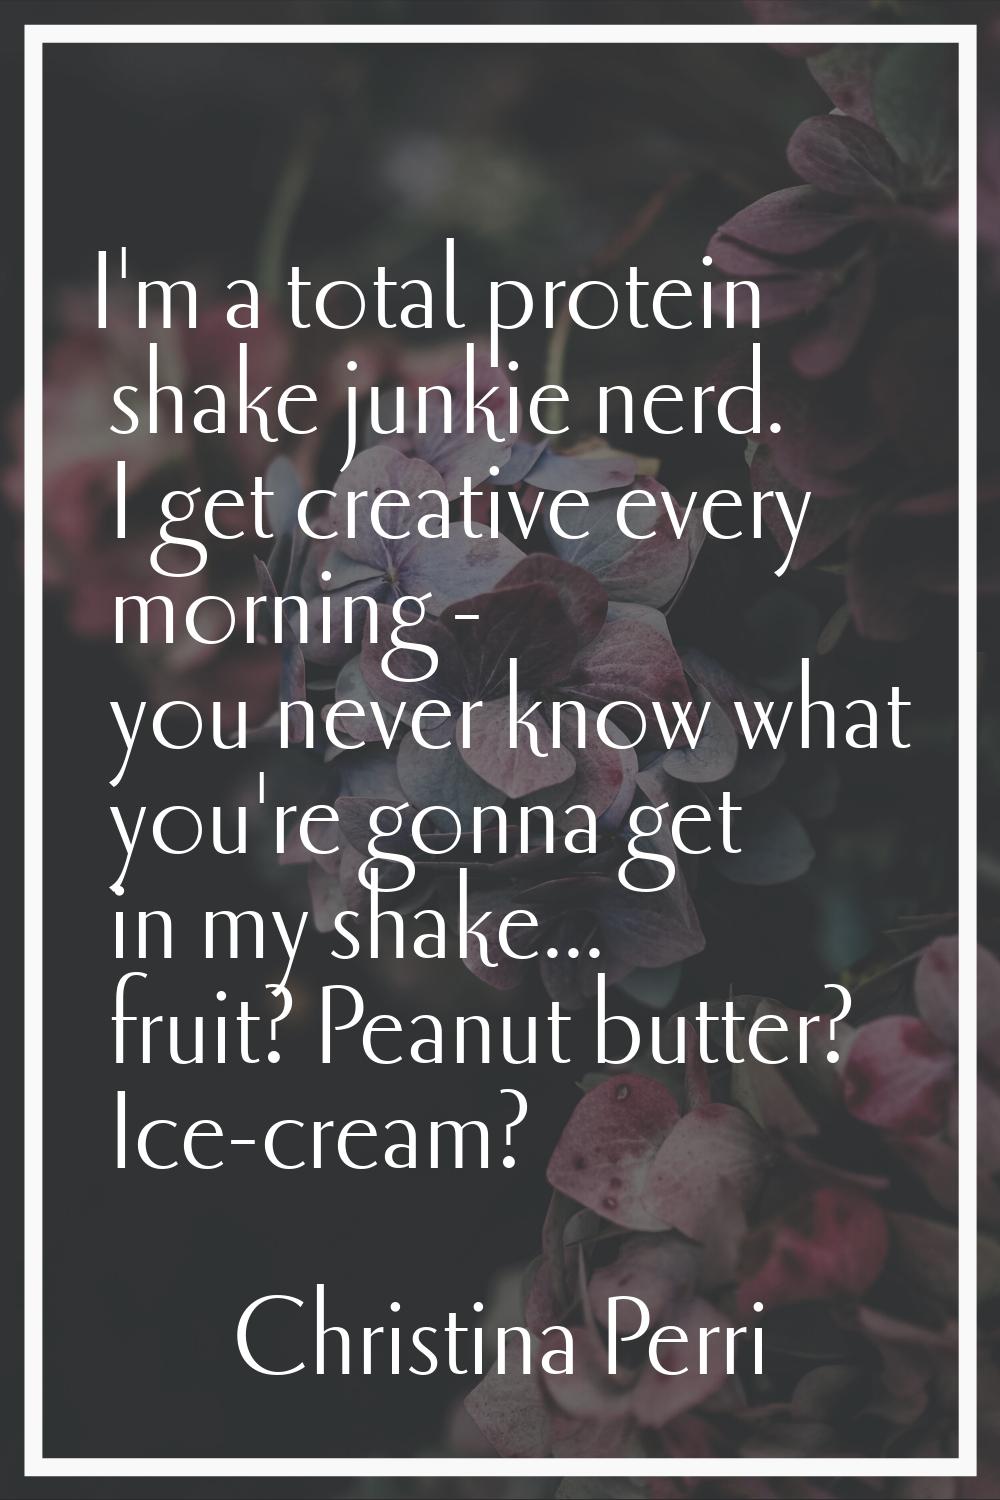 I'm a total protein shake junkie nerd. I get creative every morning - you never know what you're go